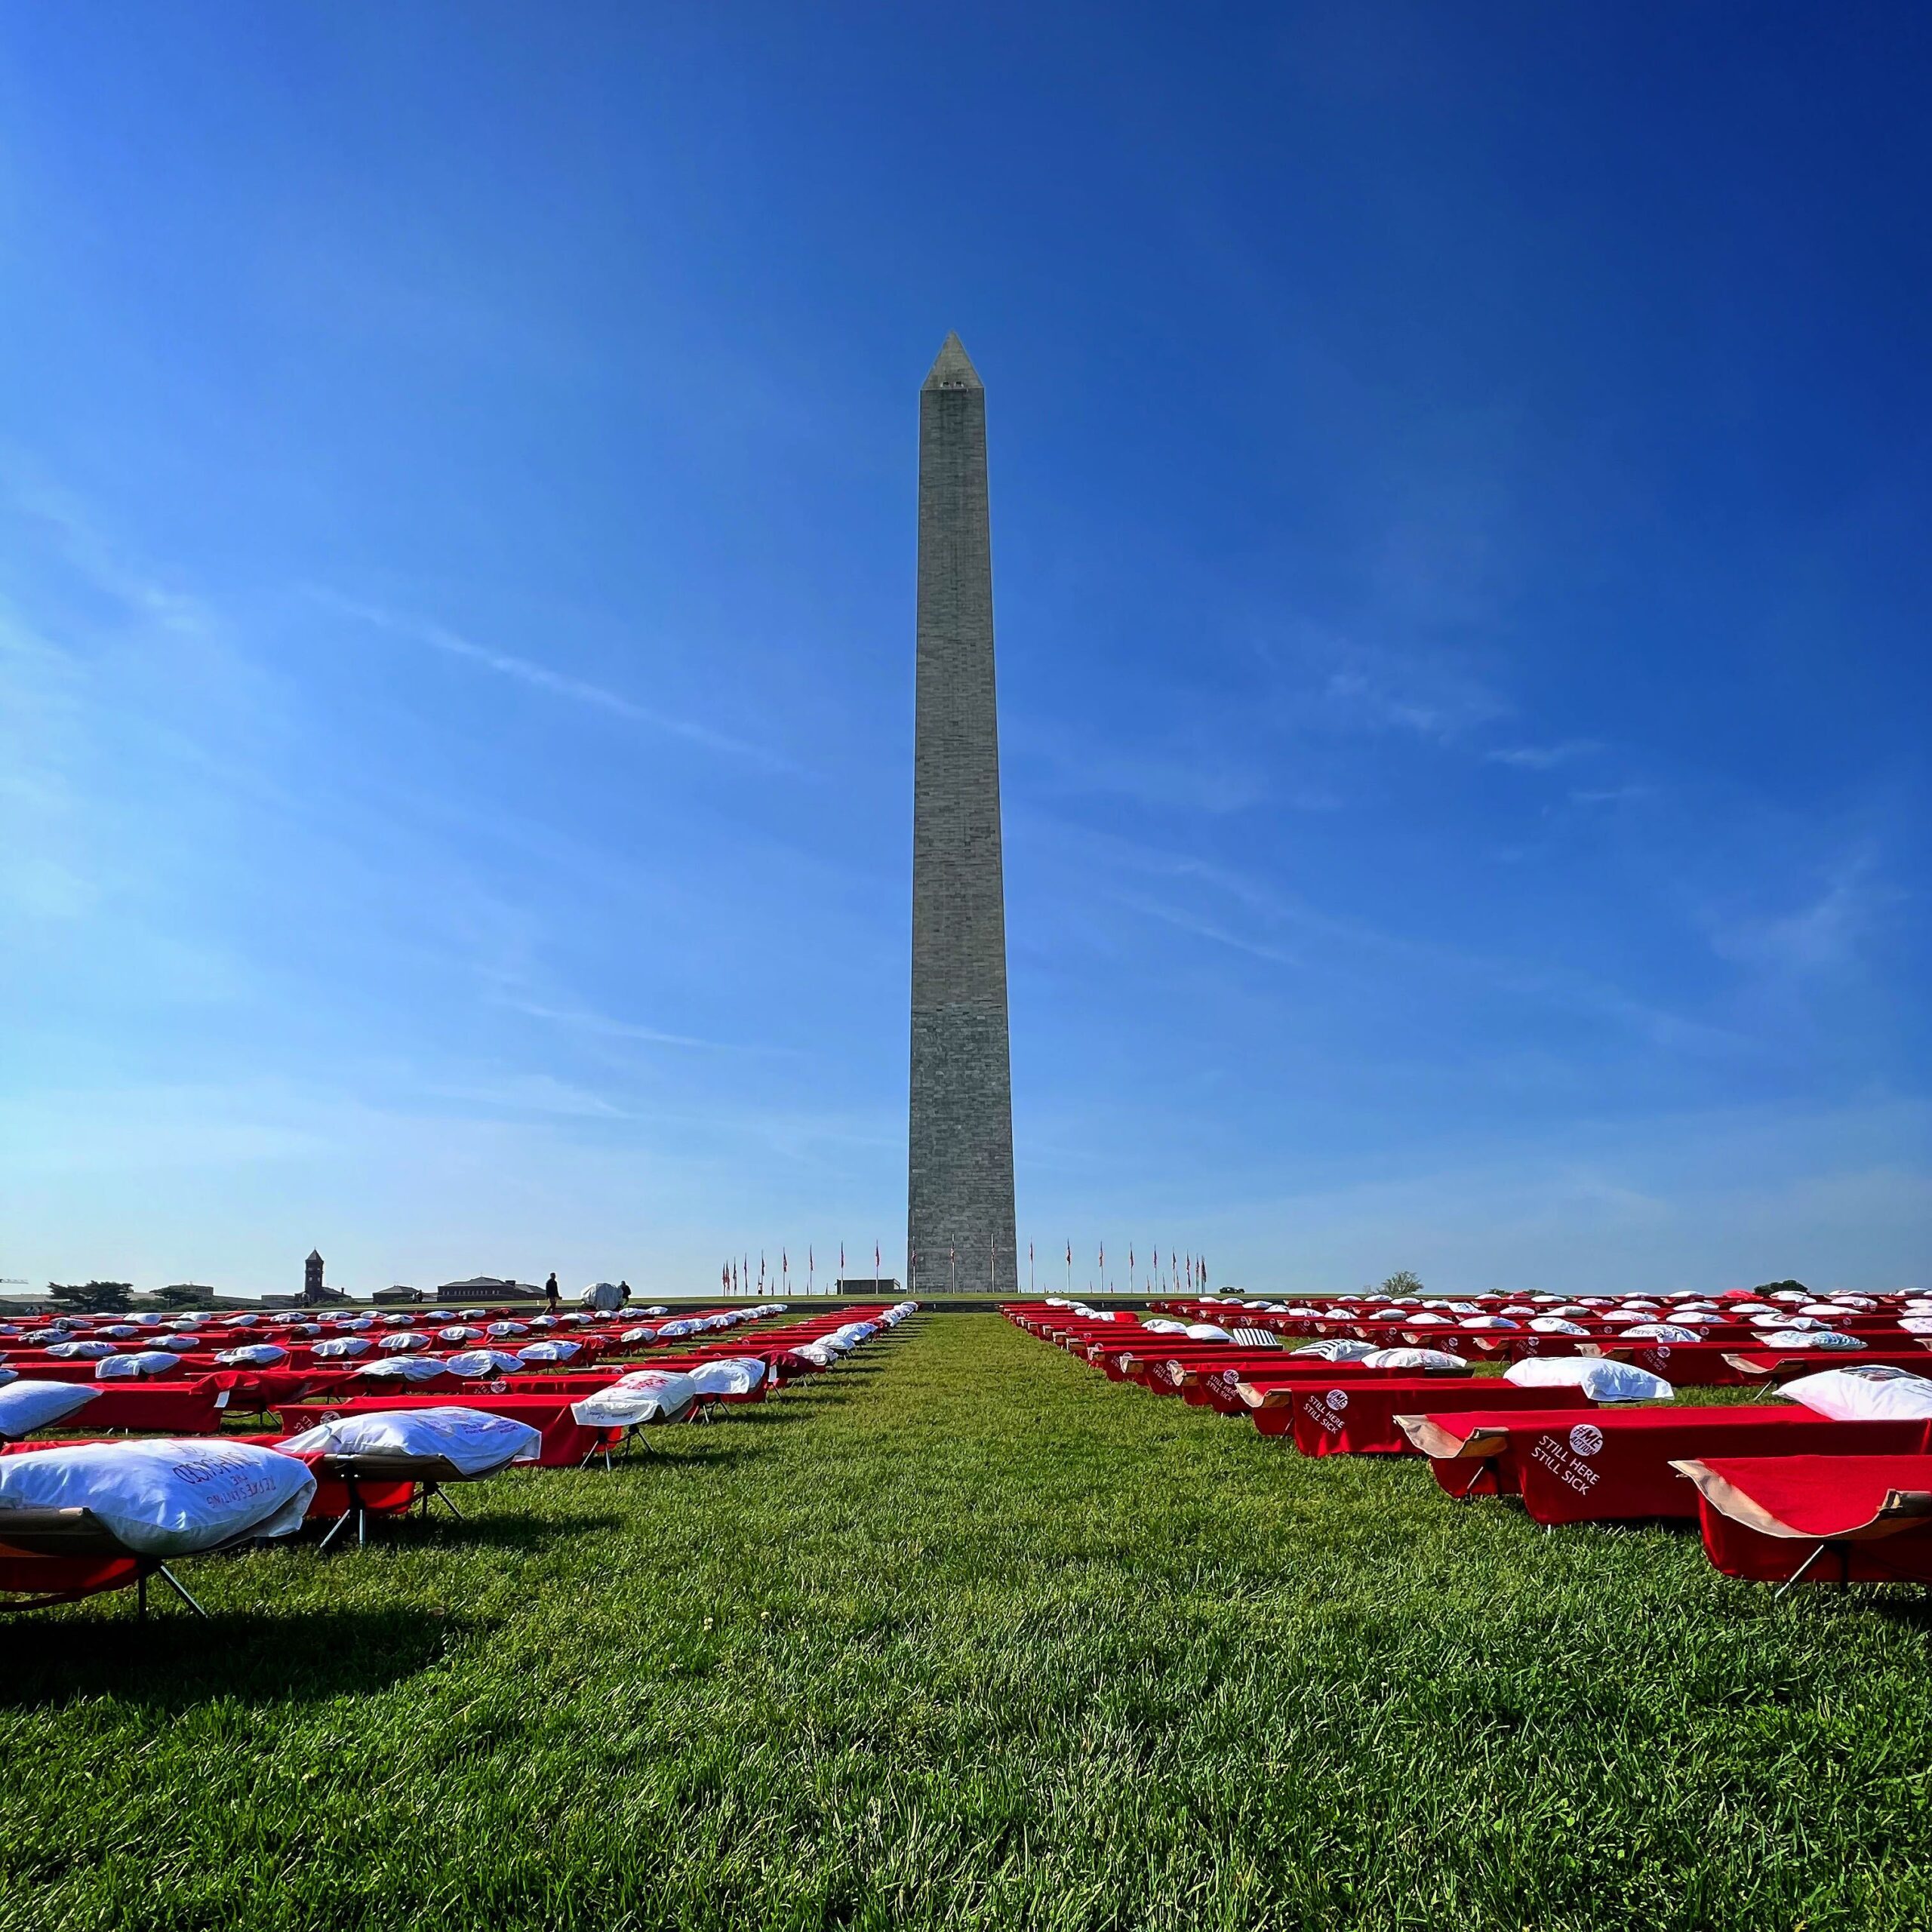 Red cots laid out in front of the Washington Monument.